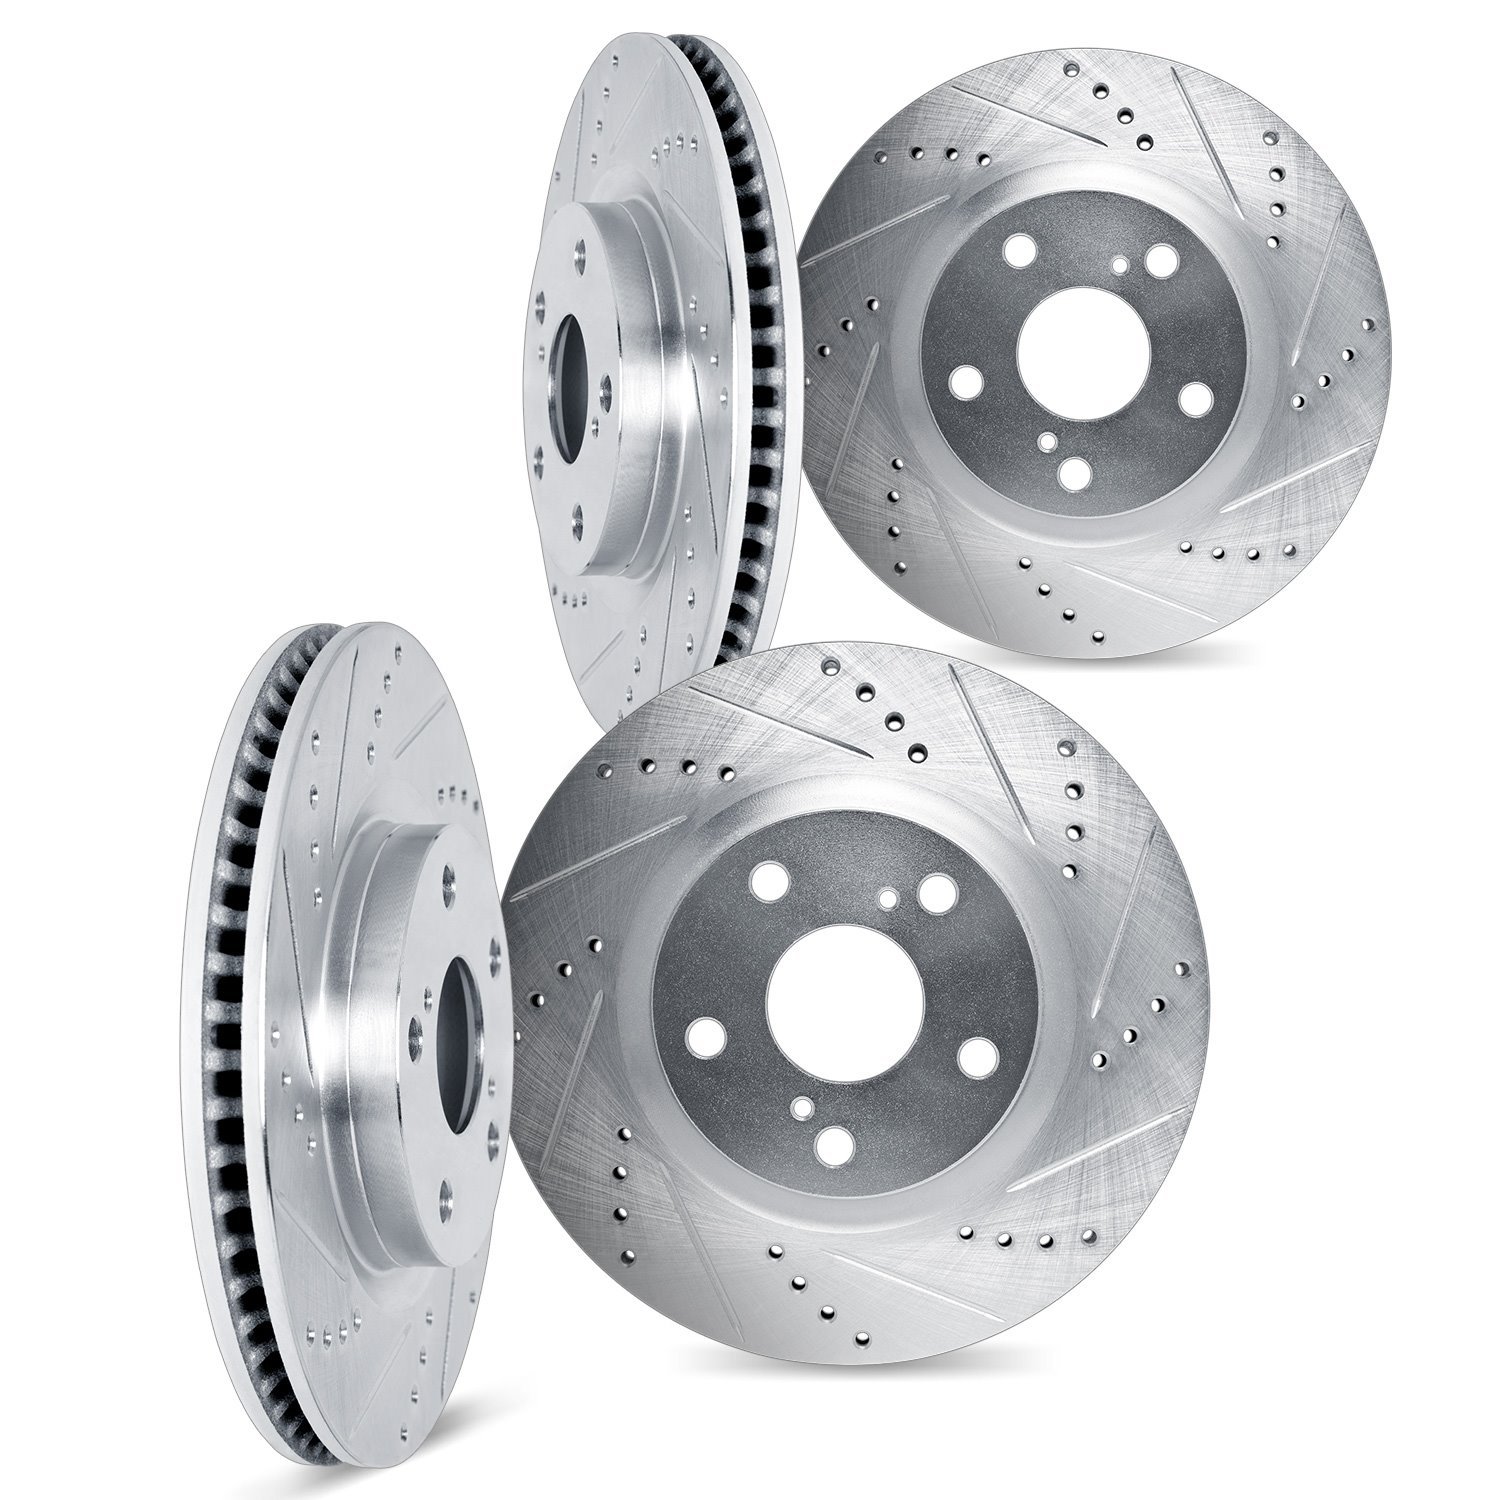 7004-11010 Drilled/Slotted Brake Rotors [Silver], Fits Select Multiple Makes/Models, Position: Front and Rear